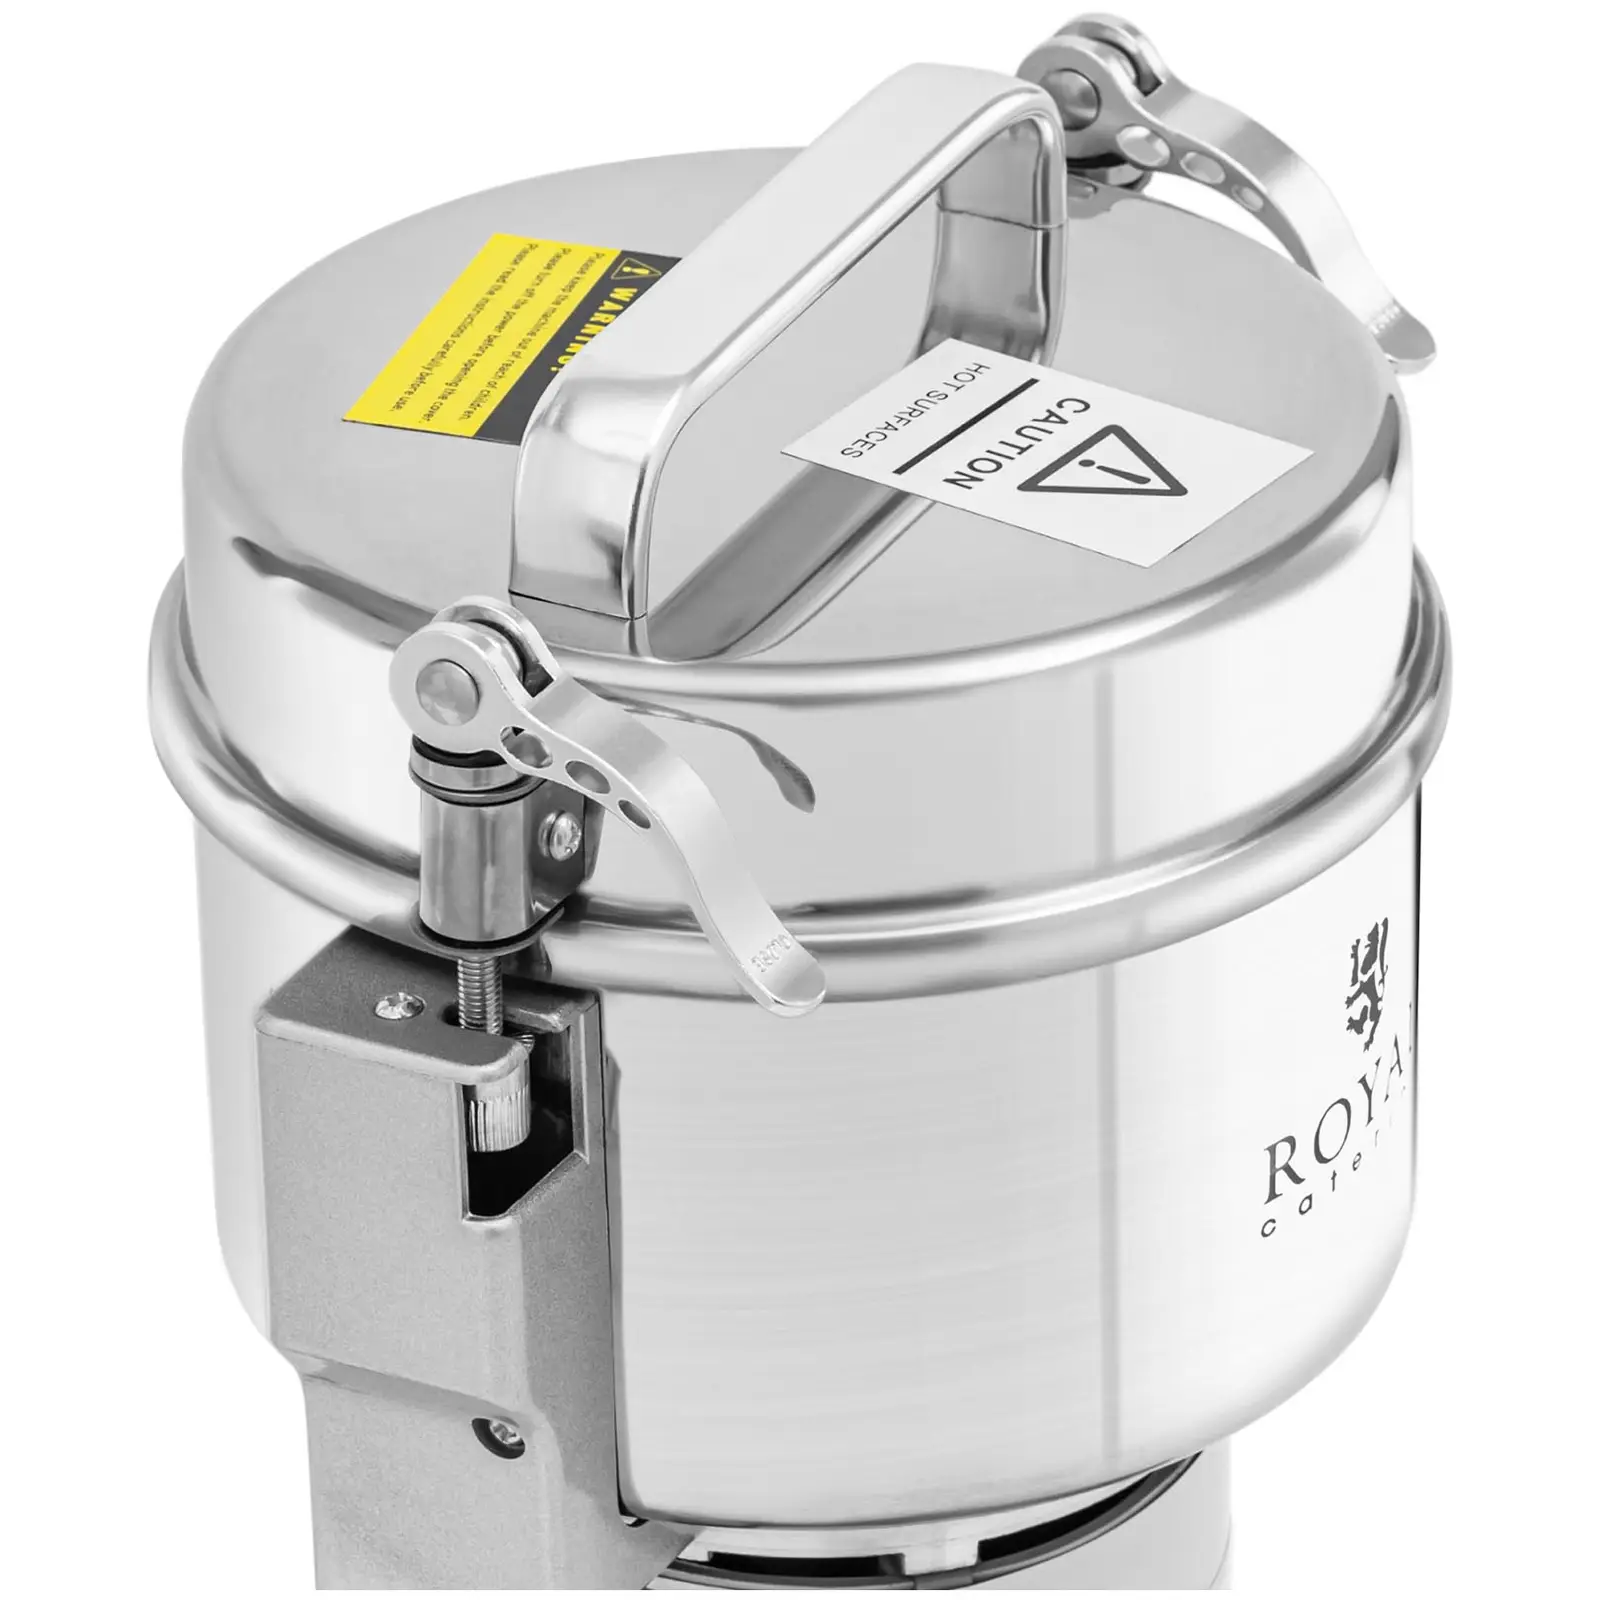 Factory second Electric spice grinder - 800 g - 17 x 9 cm - 2100 W - Royal Catering 